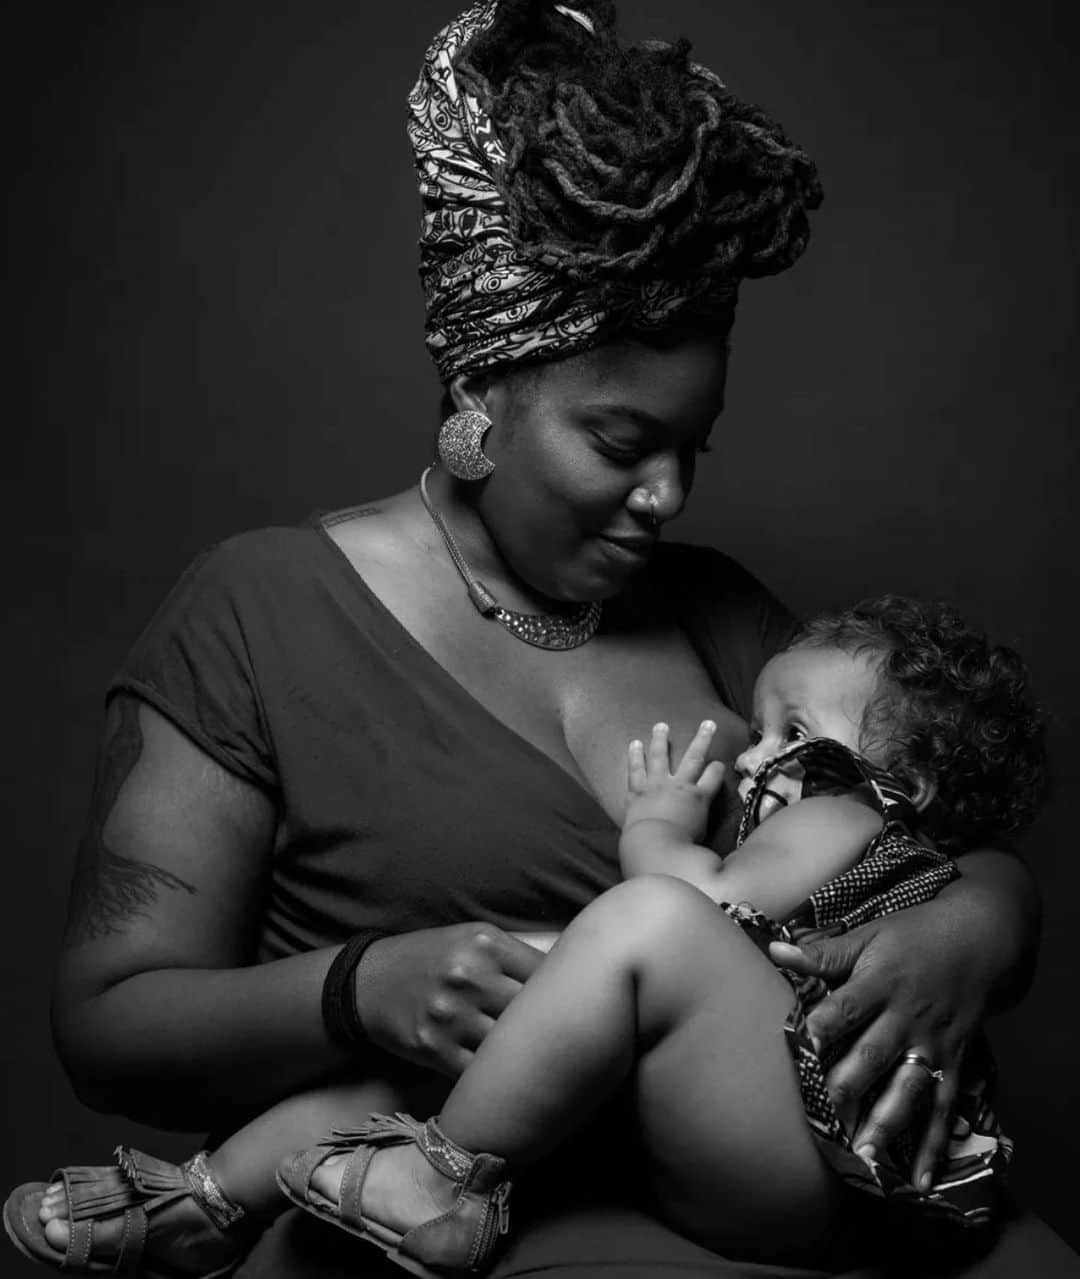 Huffington Postさんのインスタグラム写真 - (Huffington PostInstagram)「In honor of #BlackBreastfeedingWeek, HuffPost is resharing photos of proud breastfeeding mamas who discuss why they believe society needs to see more empowering images of Black women nursing their children.⁠⠀ ⁠⠀ Swipe through to see the beautiful photos.⁠⠀ ⁠⠀ 1. Anastasia West: "It is important for the public to see images of Black women breastfeeding because that would normalize the act and encourage positive attitudes toward Black women who chose to breastfeed.”⁠⠀ ⁠⠀ 2. Nicole Letizia: “If more Black breastfeeding moms were visible, there would most likely be a greater amount of programs available in a wider variety of communities to support them."⁠⠀ ⁠⠀ 3. Fatima Mills: “I think it's important for the mainstream public to see images of Black moms of all economic groups breastfeeding because it will have the greatest impact on the [breastfeeding] success rates in Black communities; it will no longer be looked at something only for the poor of foreign nations or the wealthy who can afford to stay home." ⁠⠀ ⁠⠀ 4. Stephanie Fearse: “I just want Black women to see that we can and we do breastfeed and it's beautiful. Whatever way we choose to feed our children, breastfeeding should be a part of those options."⁠⠀ ⁠⠀ 5. Angela Richardson: “It's extremely important for the public to know that our bodies are not to be objectified but to be praised for our abilities to carry our children with such ease and grace and also provide vital nourishment to them."⁠⠀ ⁠⠀ 6. Rachel Rogers-Ebert: "I often see publicity that's pro-breastfeeding geared toward Caucasian women. I feel it's important that Black women be included in this topic. We need to feel that breastfeeding is safe, natural and supported.”⁠⠀ ⁠⠀ 7. Tasha Cunningham: "It is important for others to know that there are Black women who breastfeed because it dismantles the racist belief that Black women are not maternal. This stereotype was systematically perpetuated during slavery when we were denied the right to care for and nurse our children. By creating images of us nursing, we normalize the practice of breastfeeding and end the sexual objectification of our bodies.”⁠⠀ ⁠⠀ Read more - link in bio! 📷@damondahlen」8月26日 10時11分 - huffpost